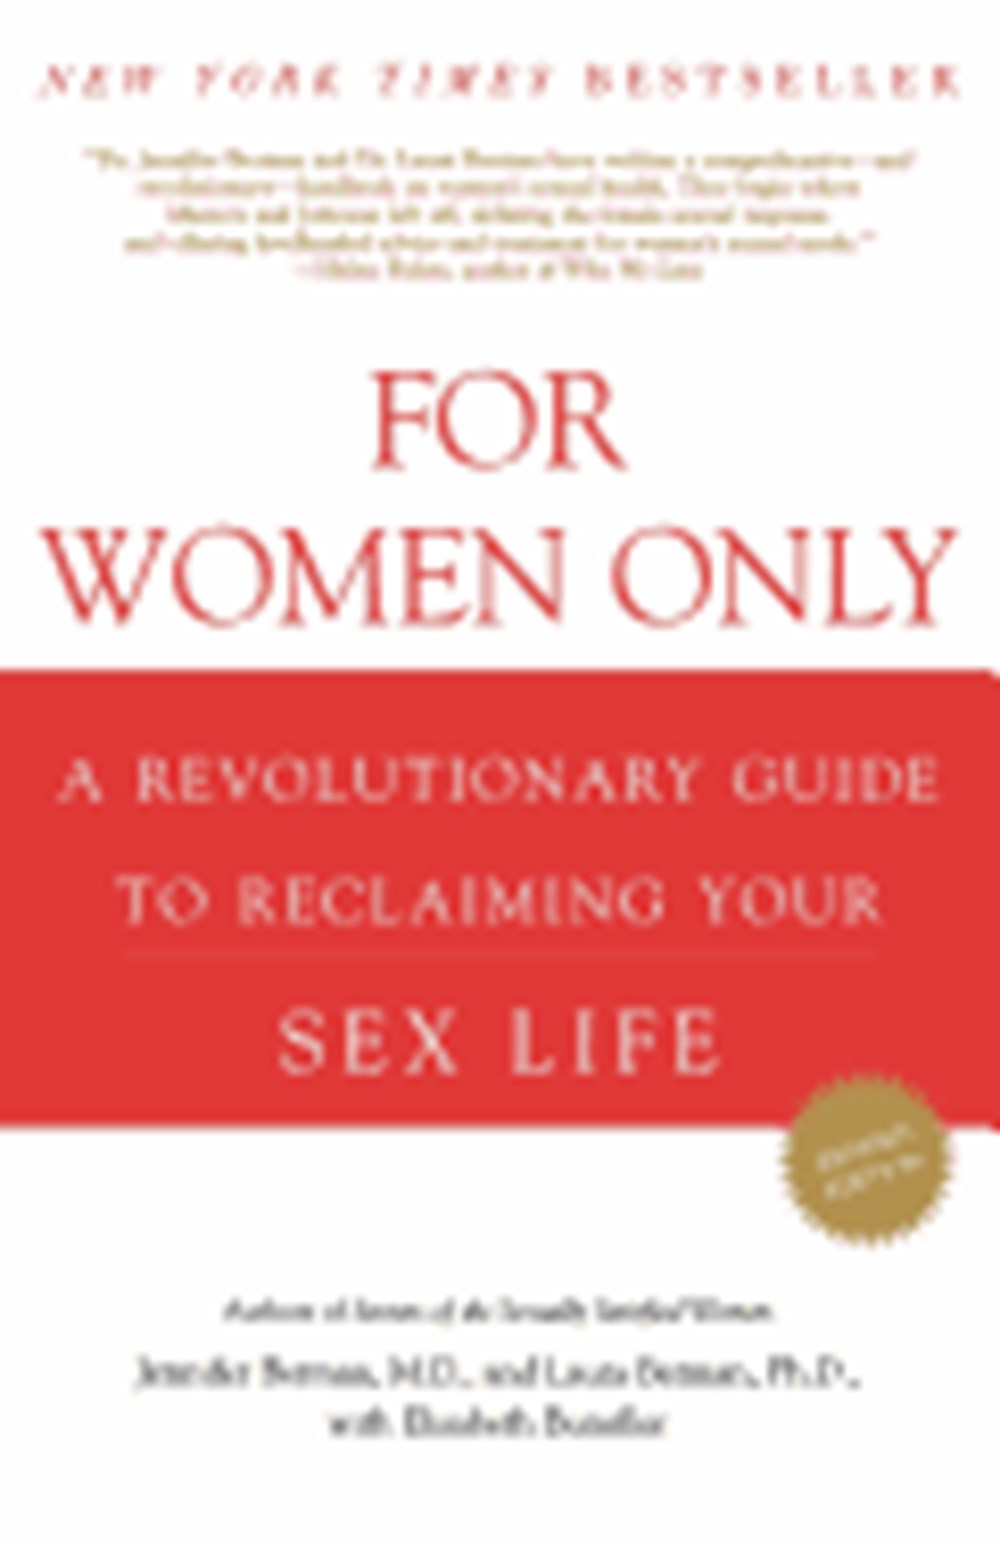 For Women Only: A Revolutionary Guide to Reclaiming Your Sex Life (Revised)